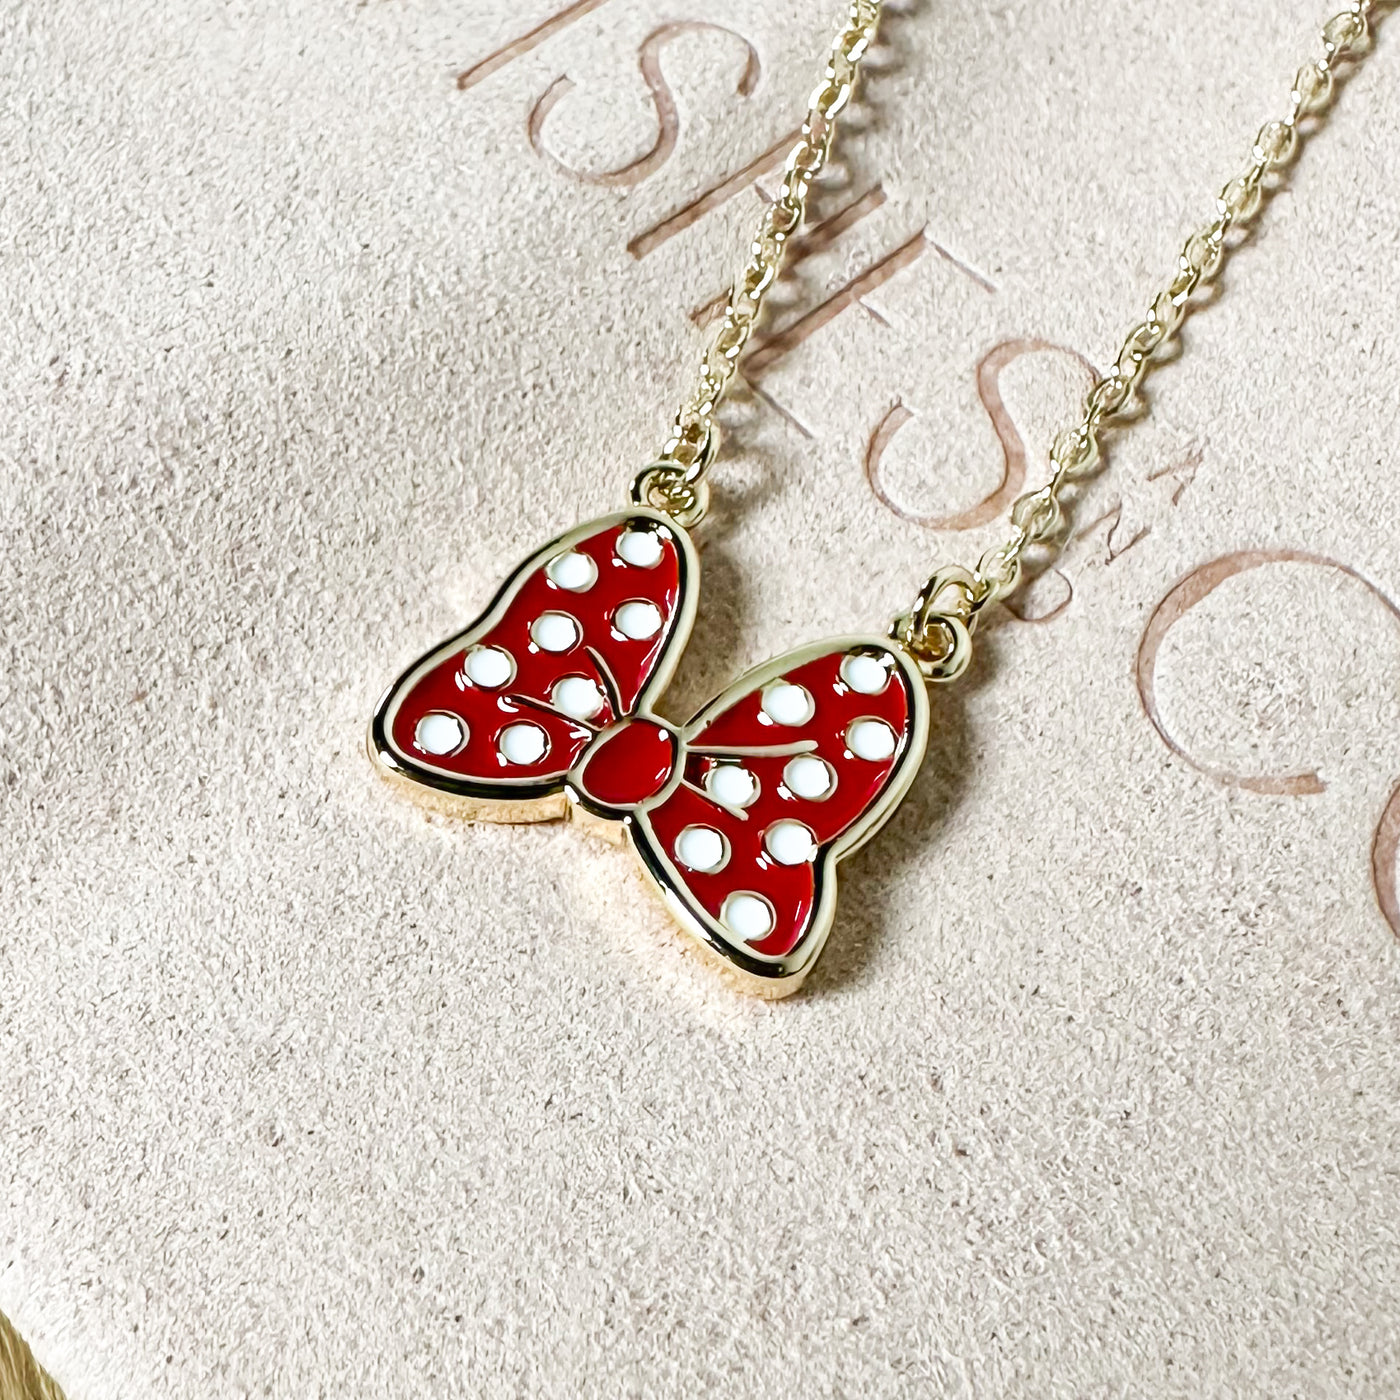 Minnie Mouse Inspired Necklace - Shop Online at Moi-Glam Boutique